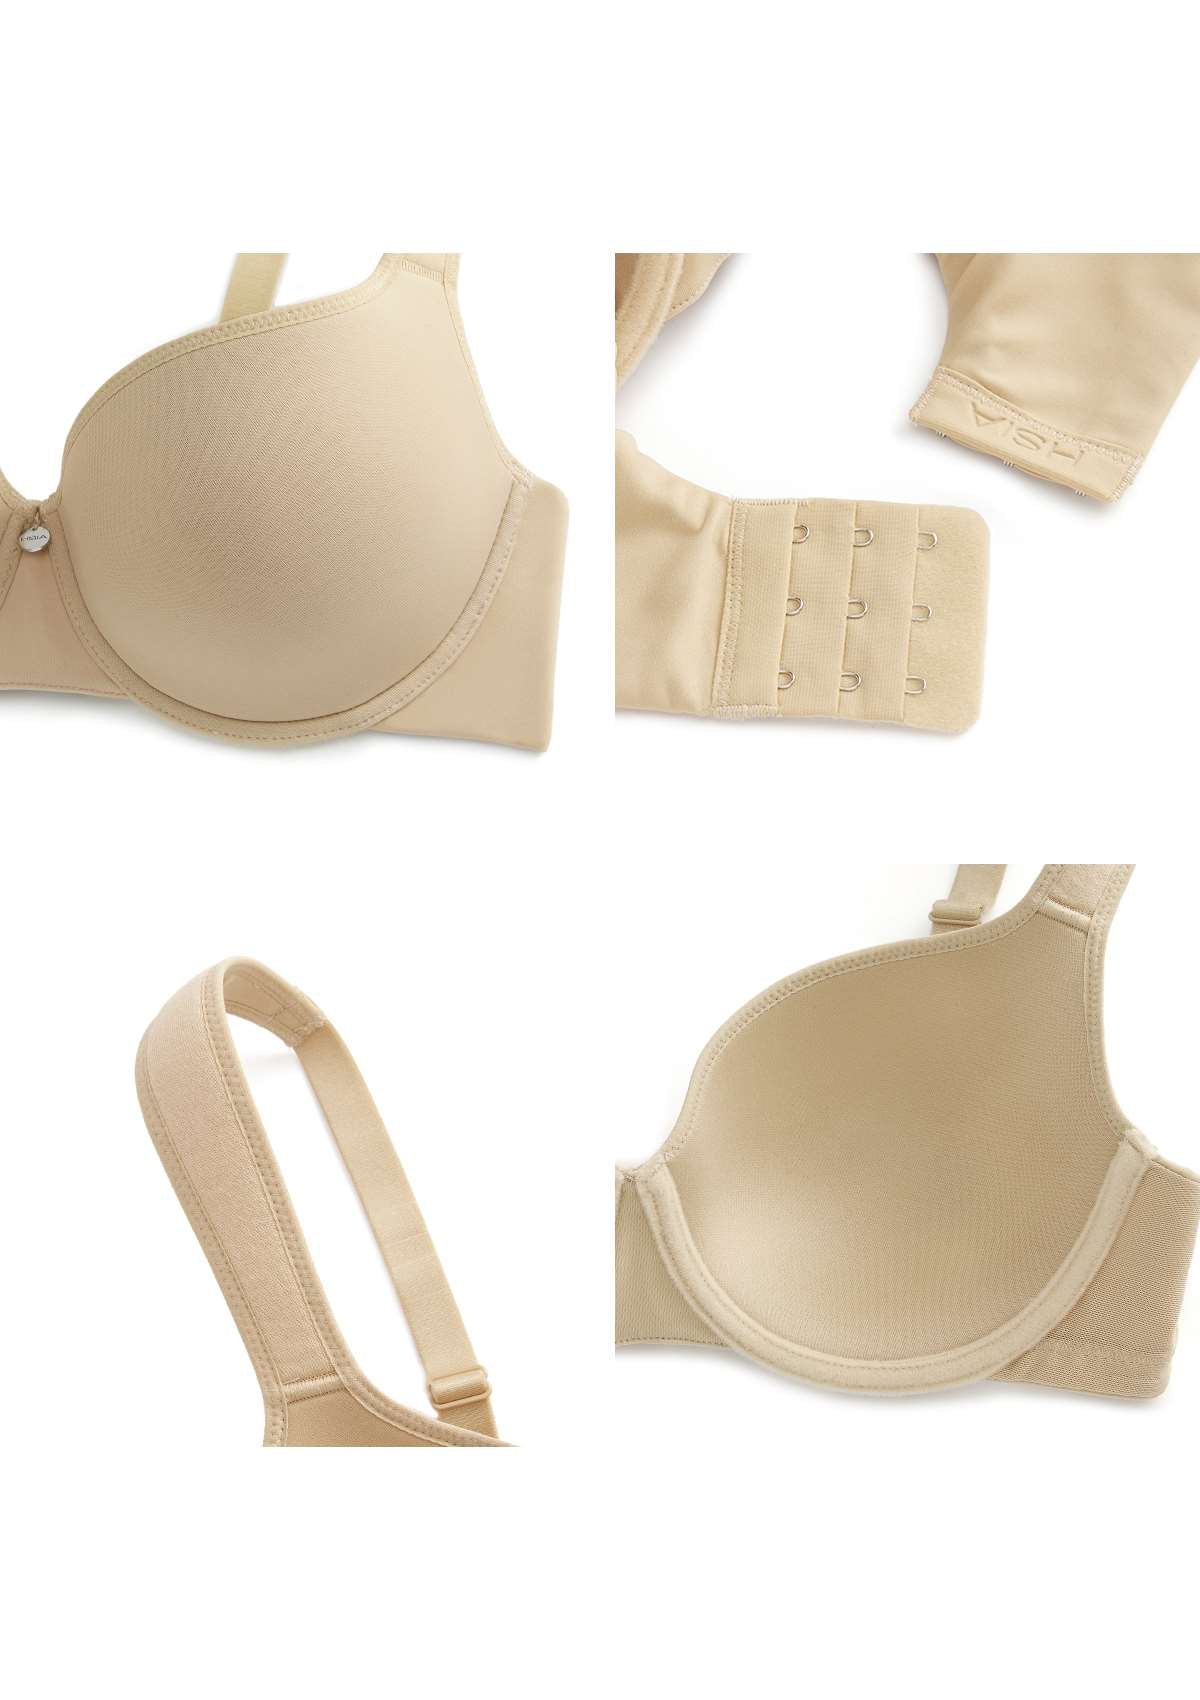 HSIA Patricia Seamless Lightly Padded Minimizer Bra -for Bigger Busts - Beige / 36 / C